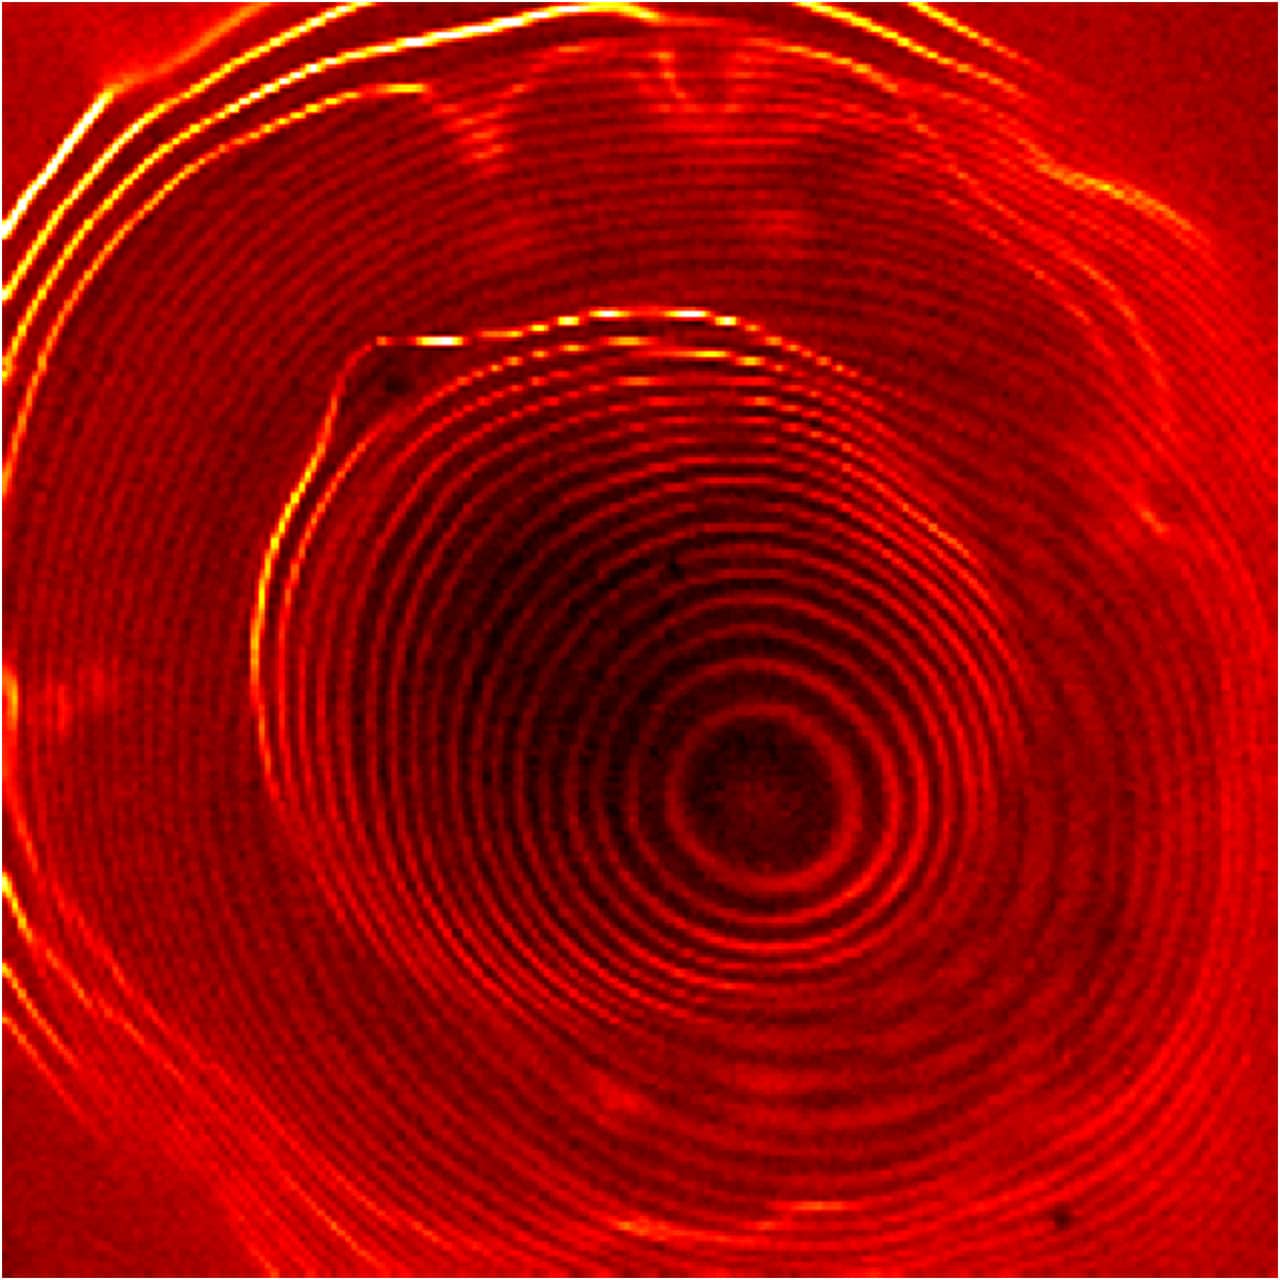 Image of a novel system of coupled quantum dots taken with a scanning tunneling microscope shows electrons orbiting within two concentric sets of closely spaced rings, separated by a gap. The inner set of rings represents one quantum dot; the outer, brighter set represents a larger, outer quantum dot. Credit: NIST